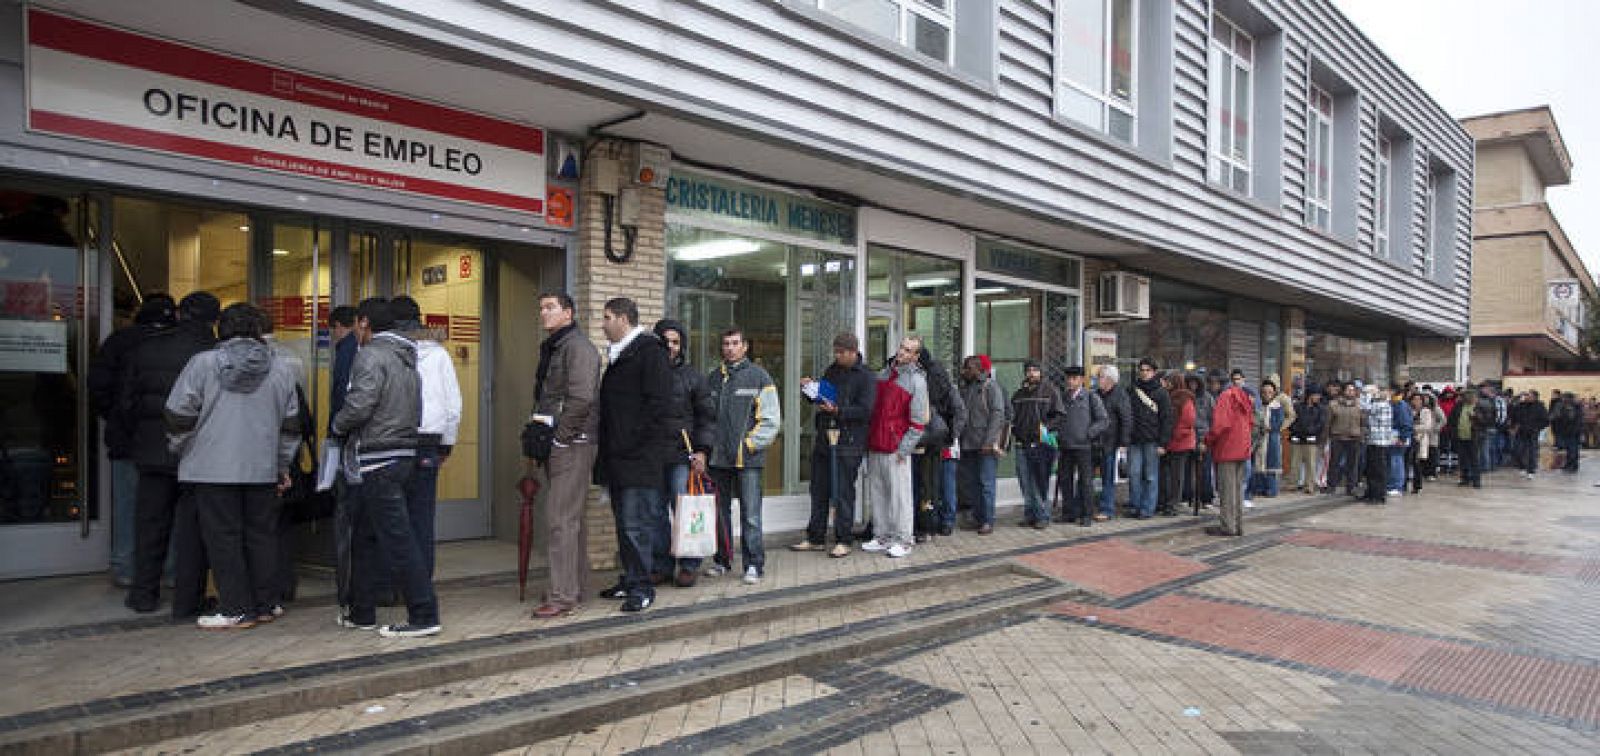 People stand in a queue to enter a government job centre in Madrid